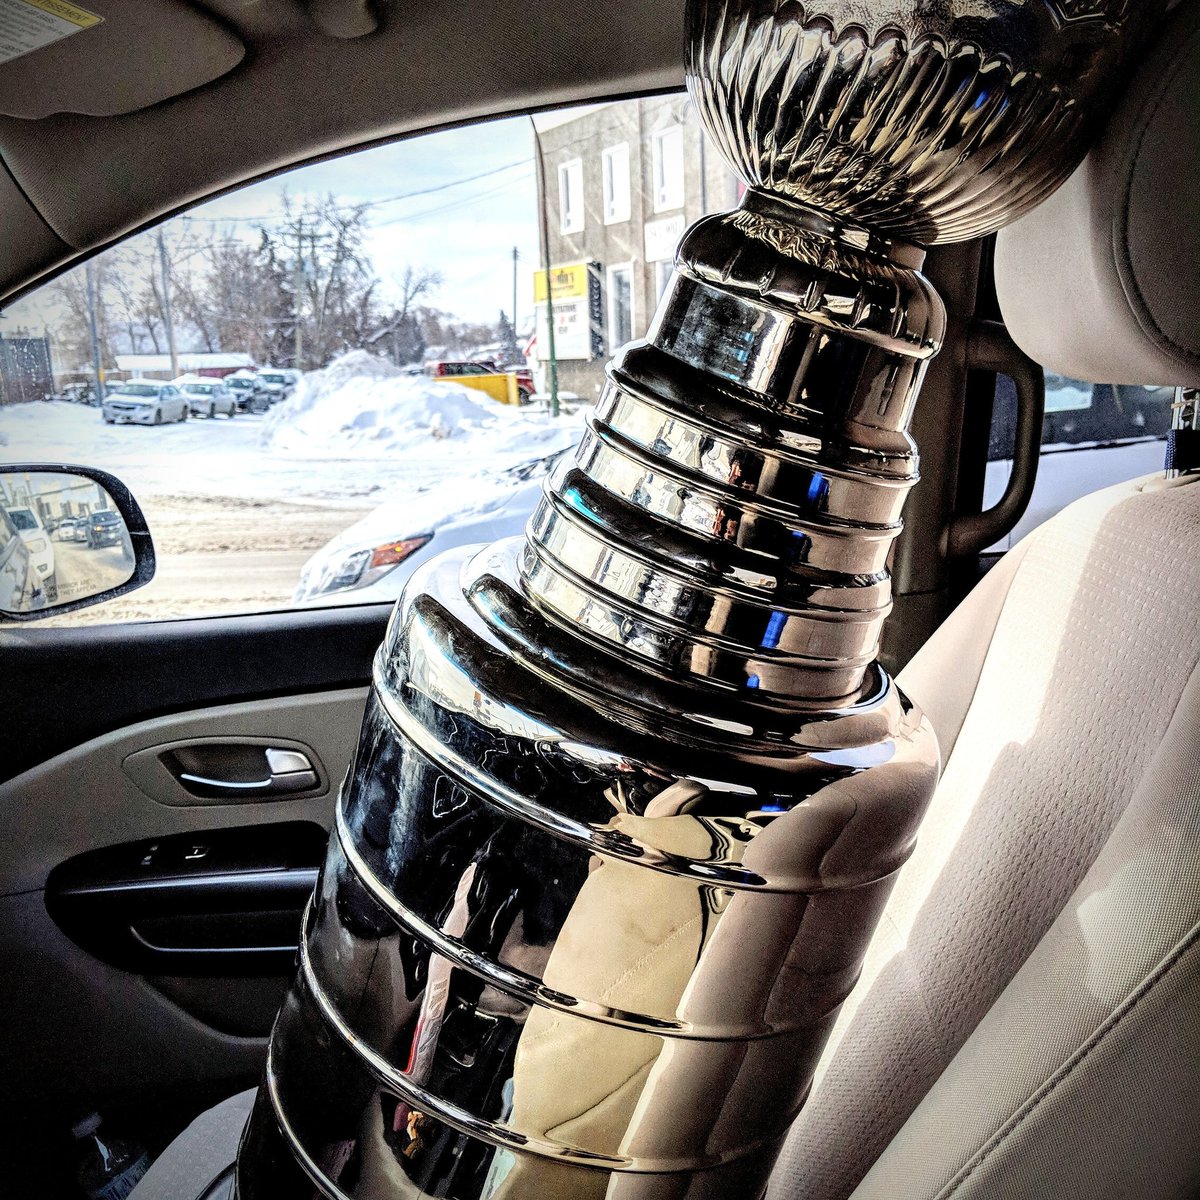 The Premier Events Cup is on its way to a corporate event 🏆 Stay tuned tomorrow to find out which Celebrity will be in attendance, and what awesome company is putting on this epic party for their staff! #wewantthecup #celebrityevent #premierevents